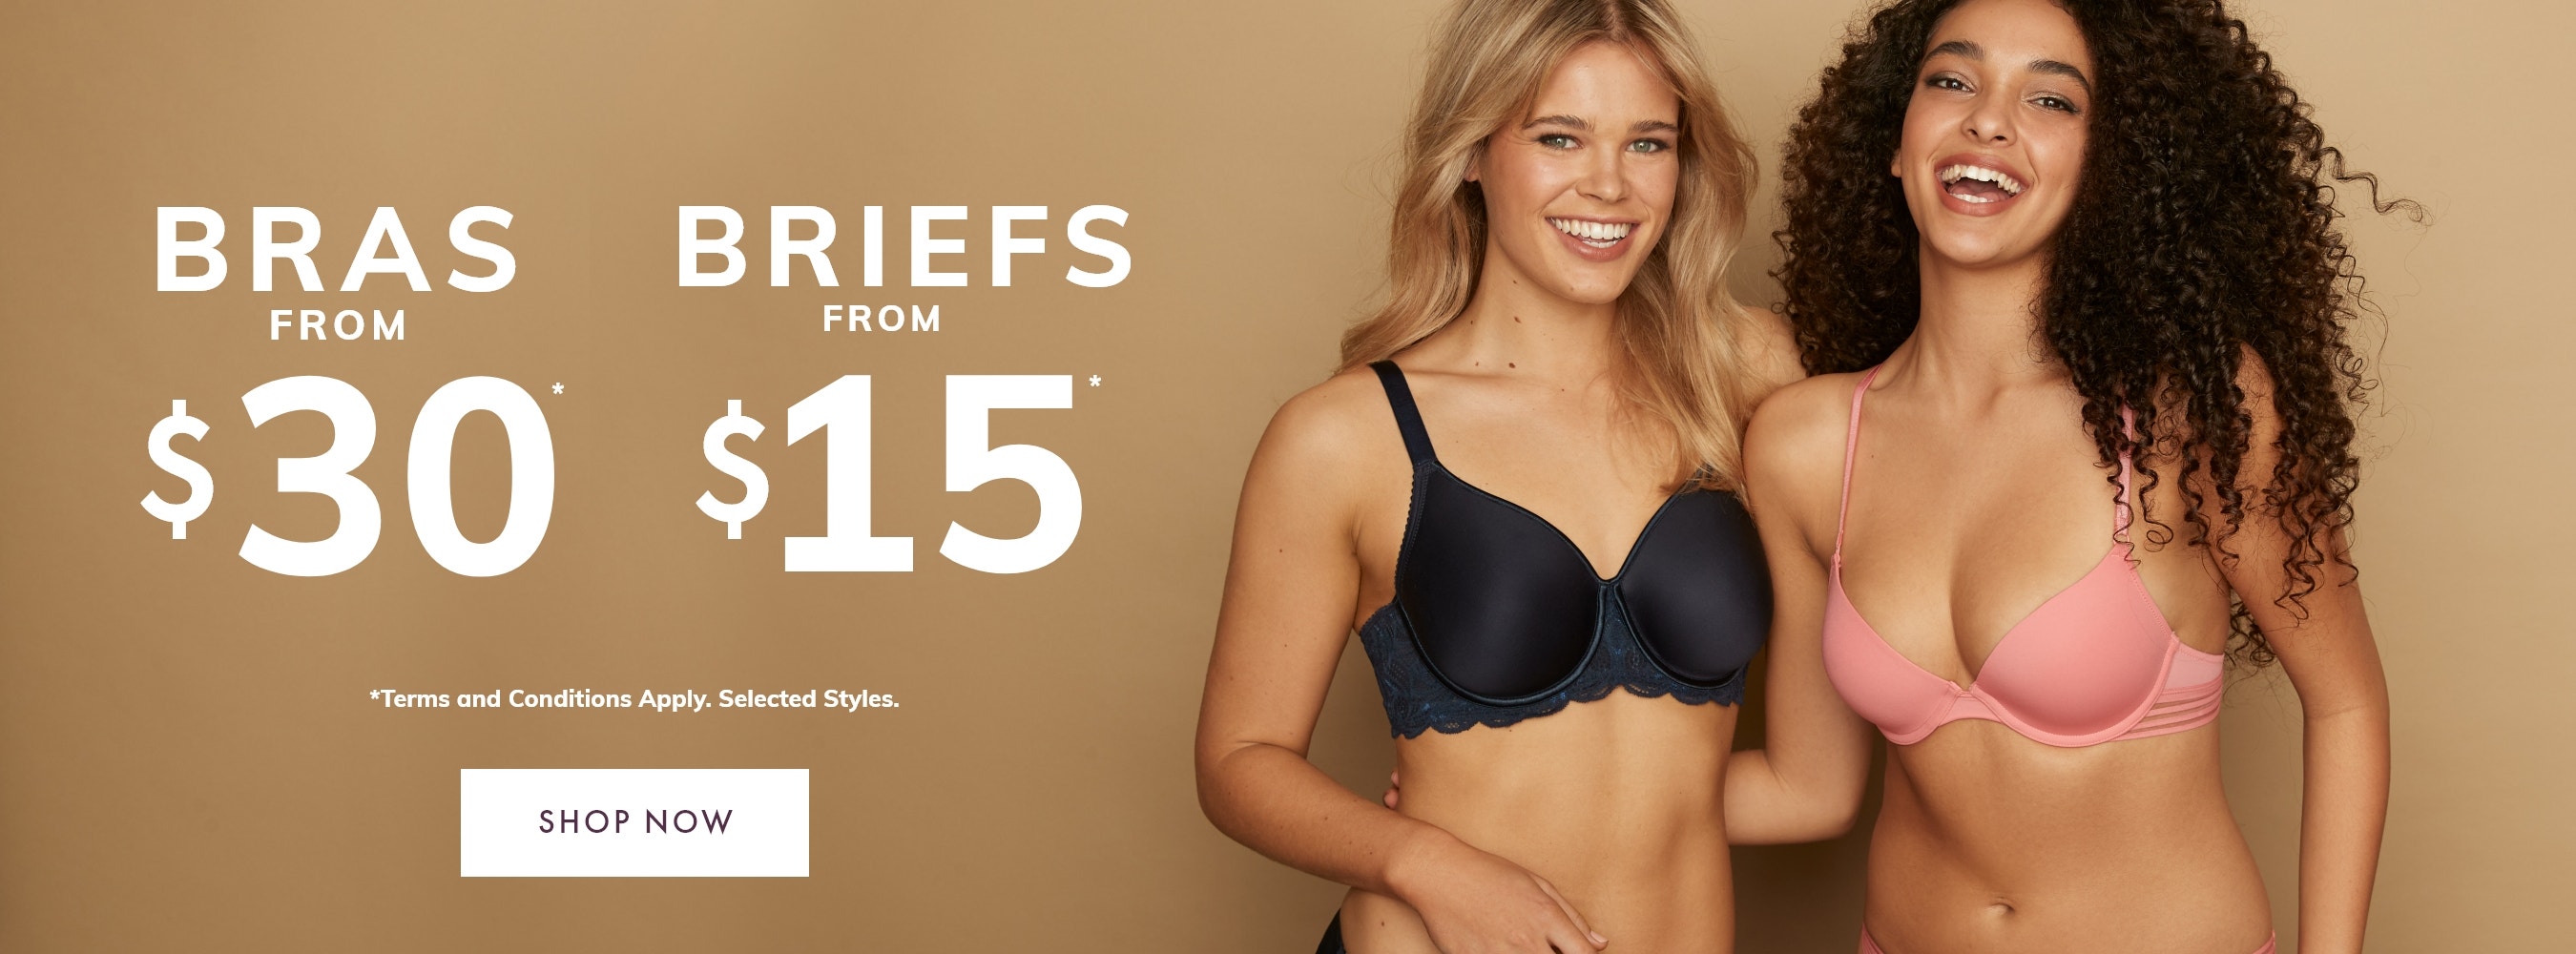 Shop bras from $30, briefs from $15 for a limited time